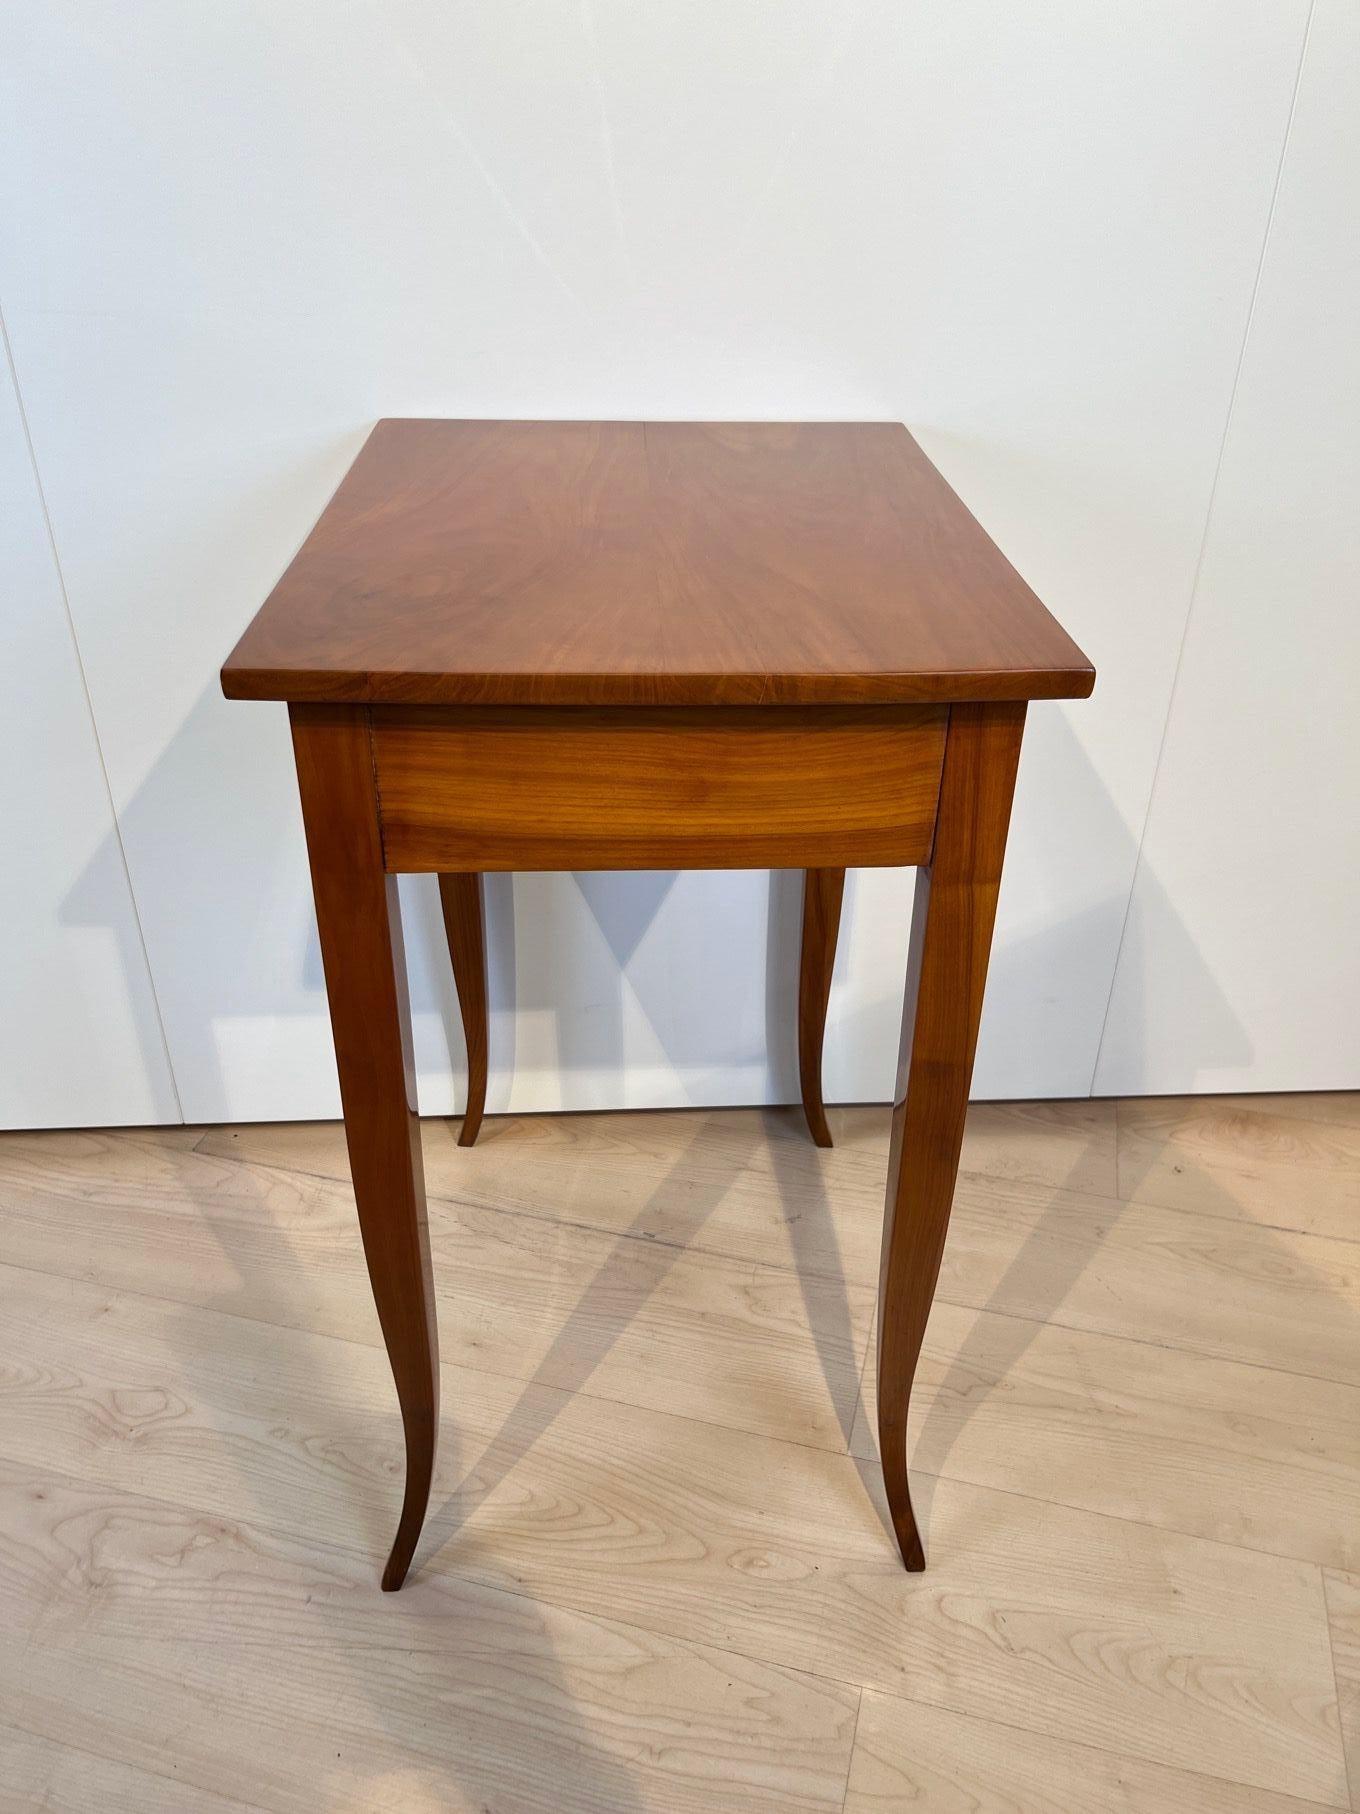 Biedermeier Side Table with Drawer, Cherry Wood, South Germany circa 1825 For Sale 1